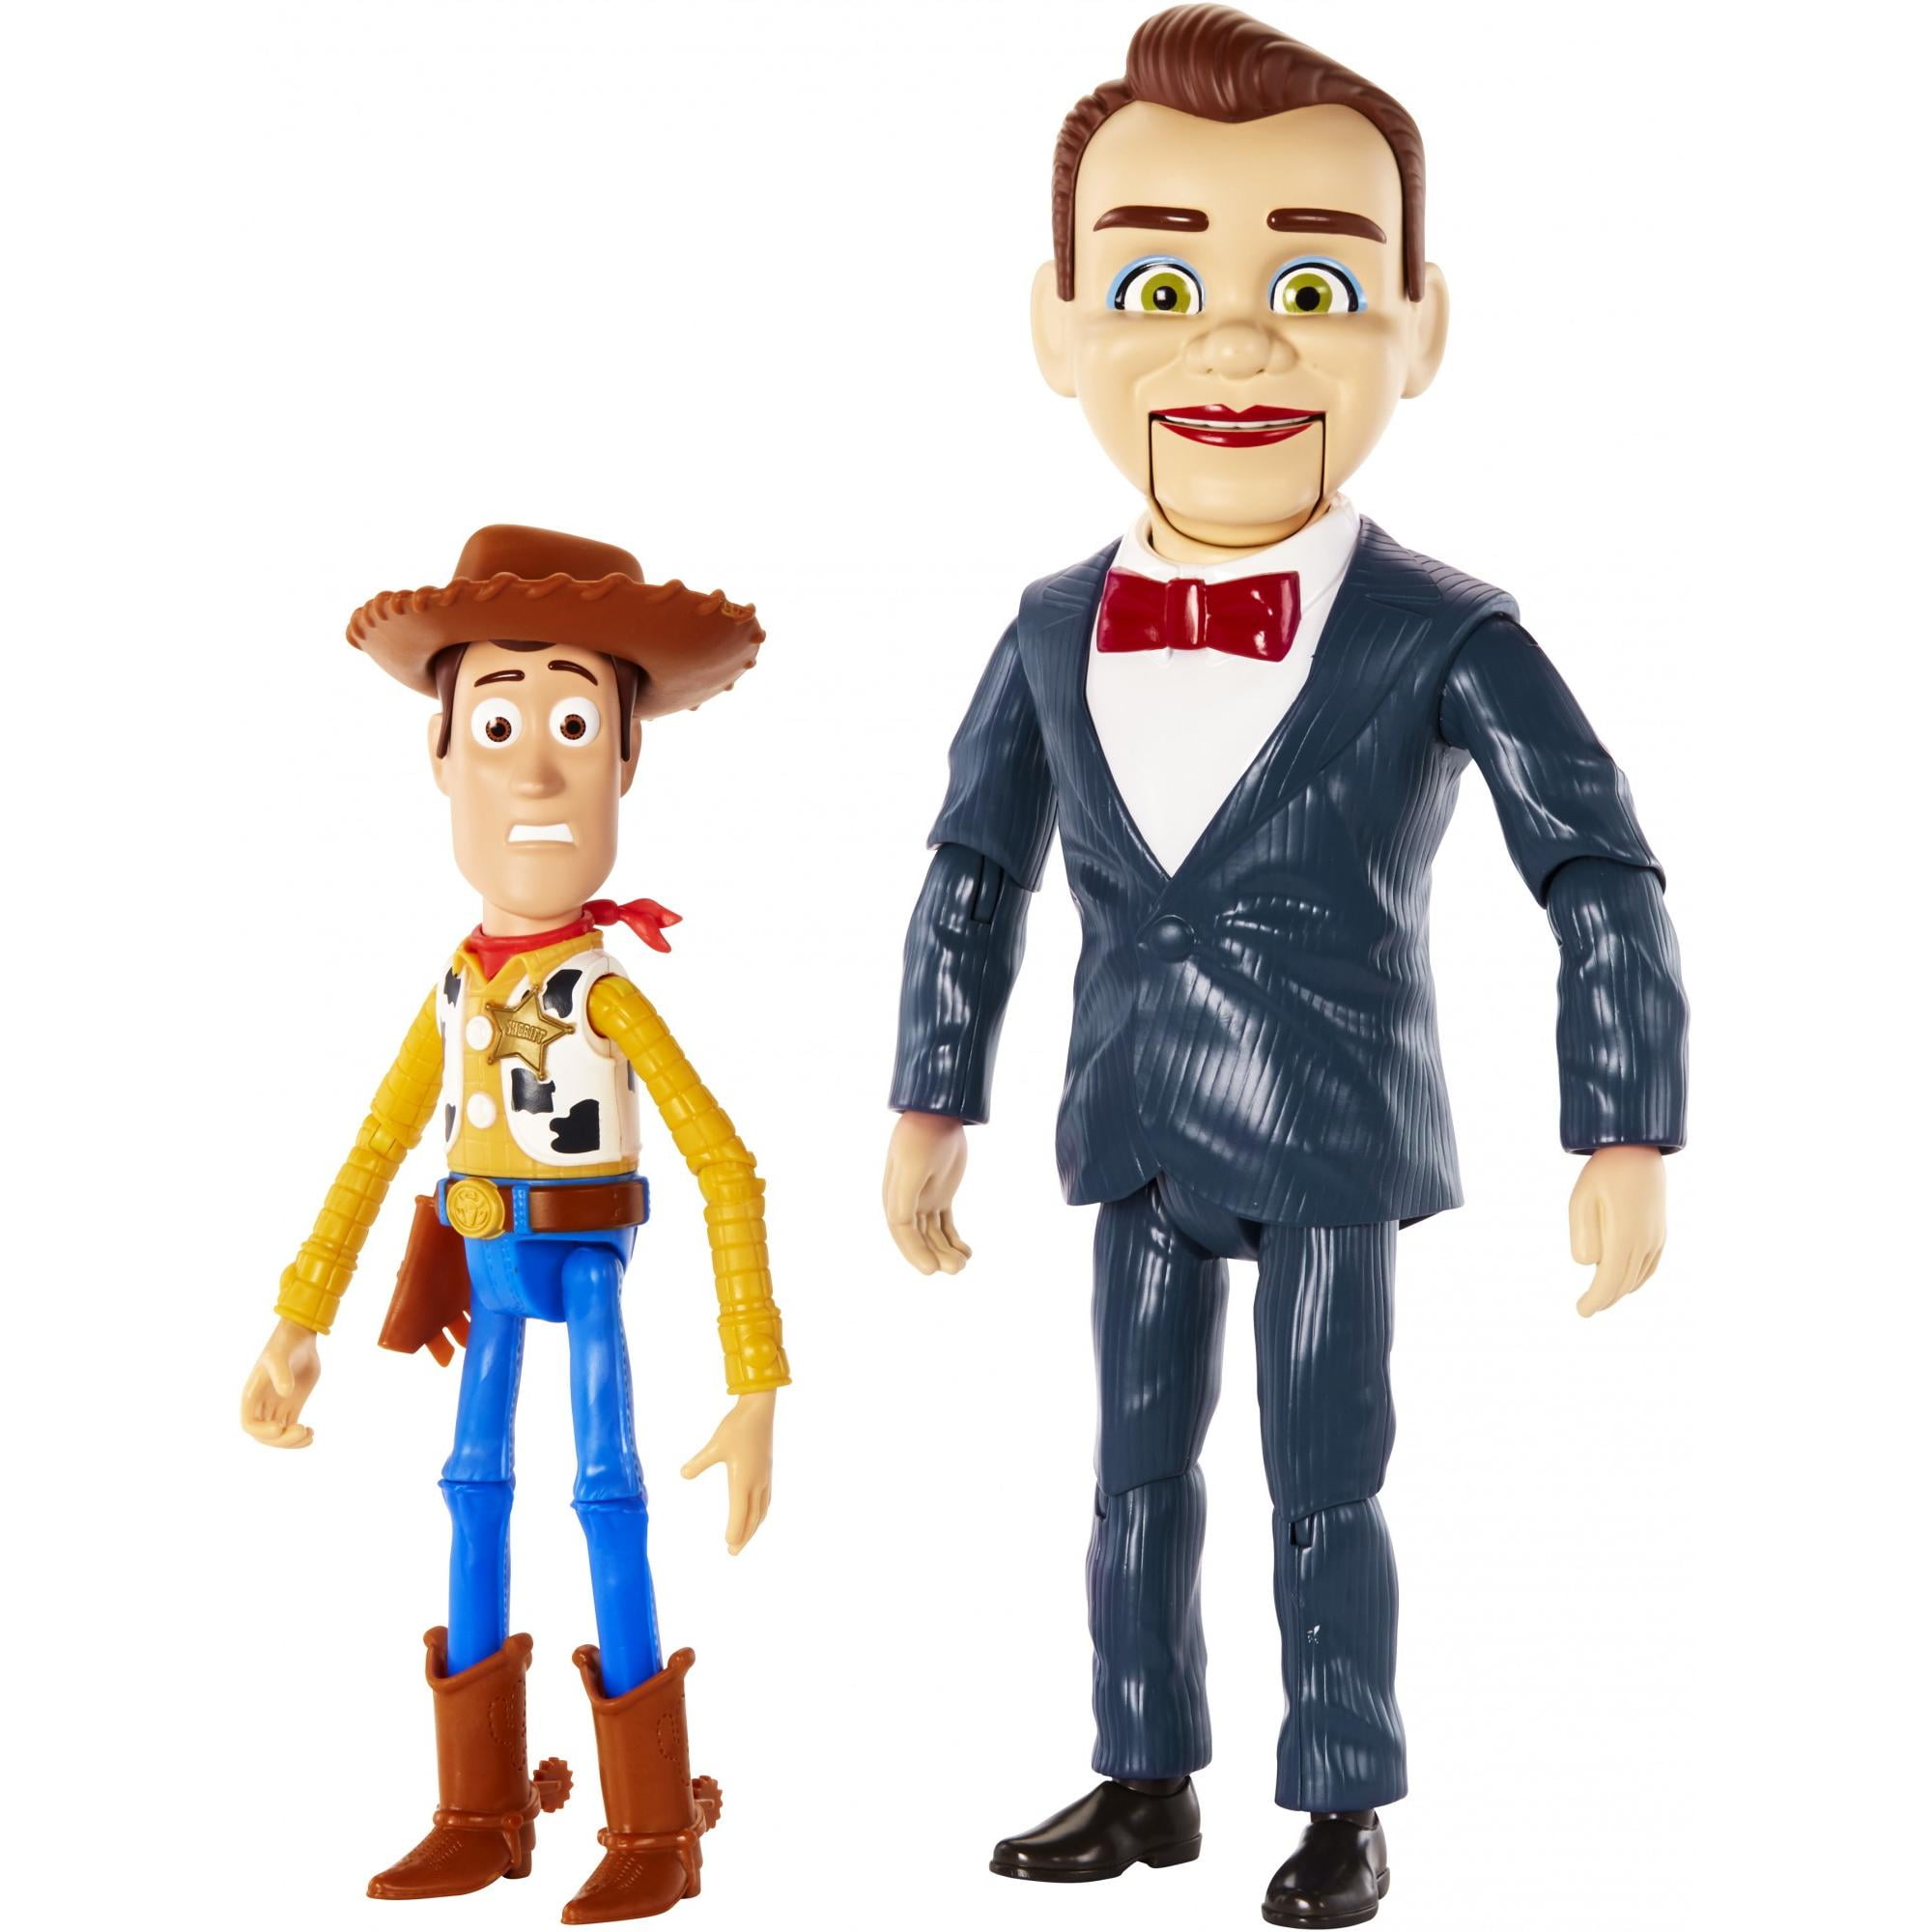 toy story 4 characters vincent